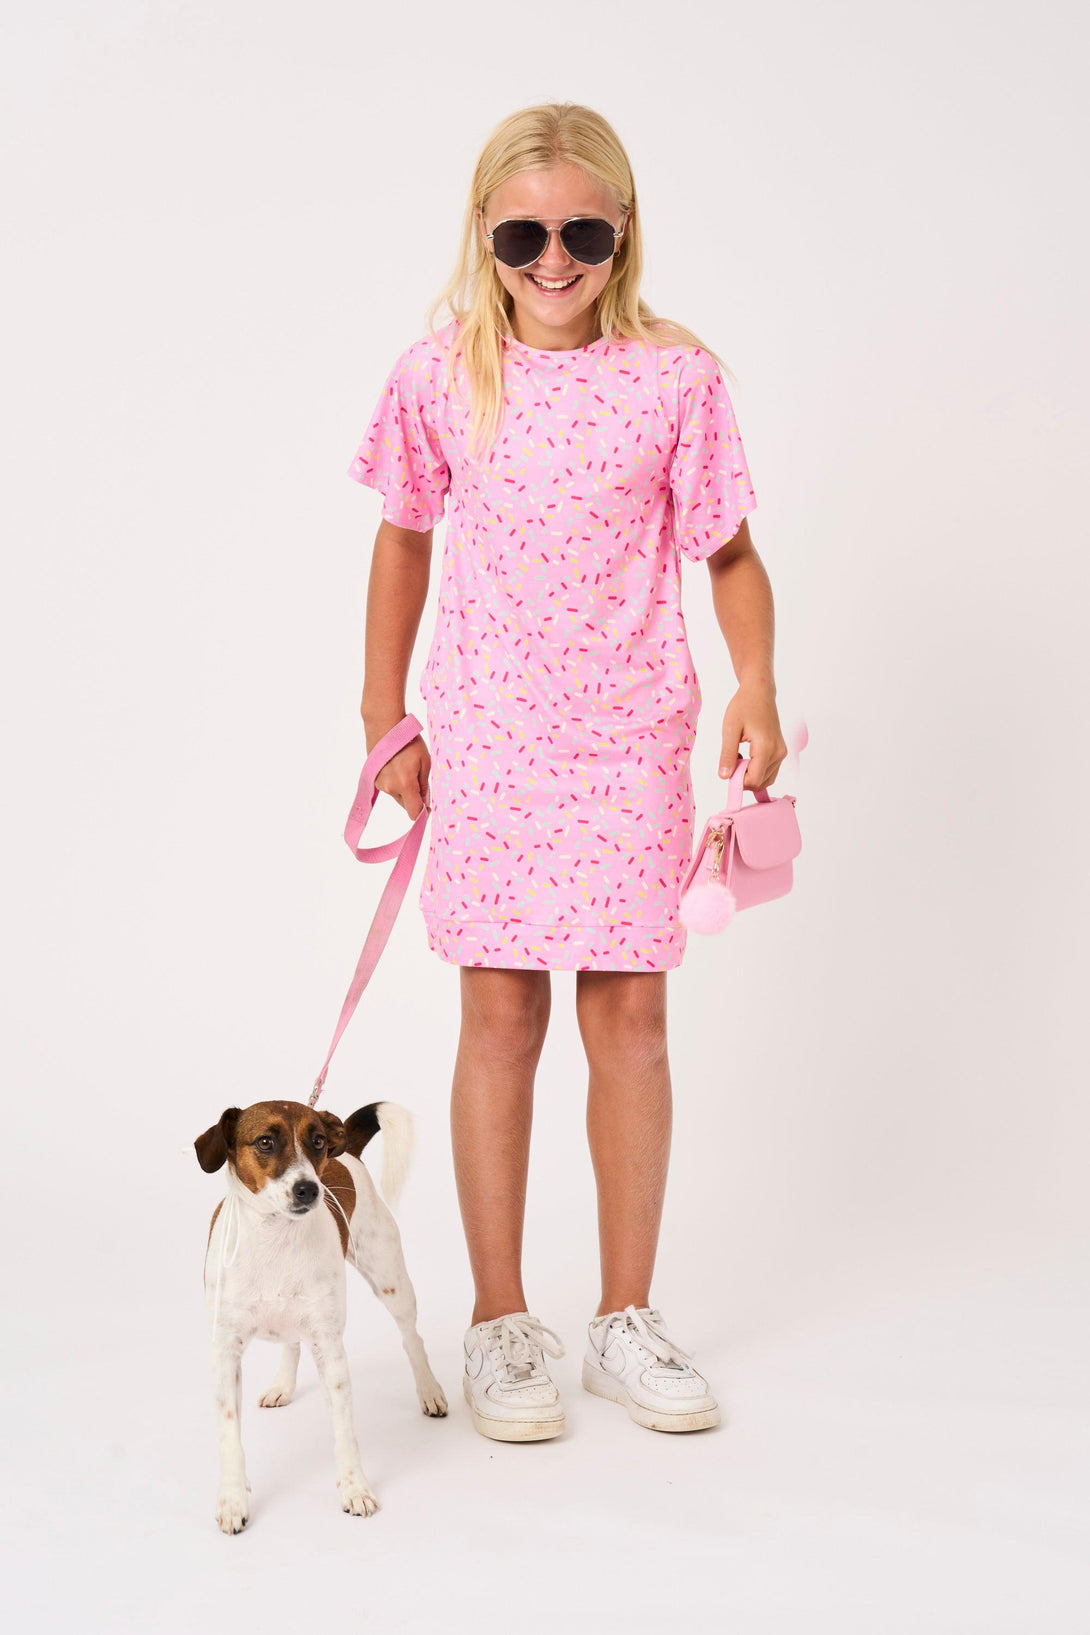 Extra Sprinkles Soft To Touch - Kids Lazy Girl Dress Tee-Activewear-Exoticathletica